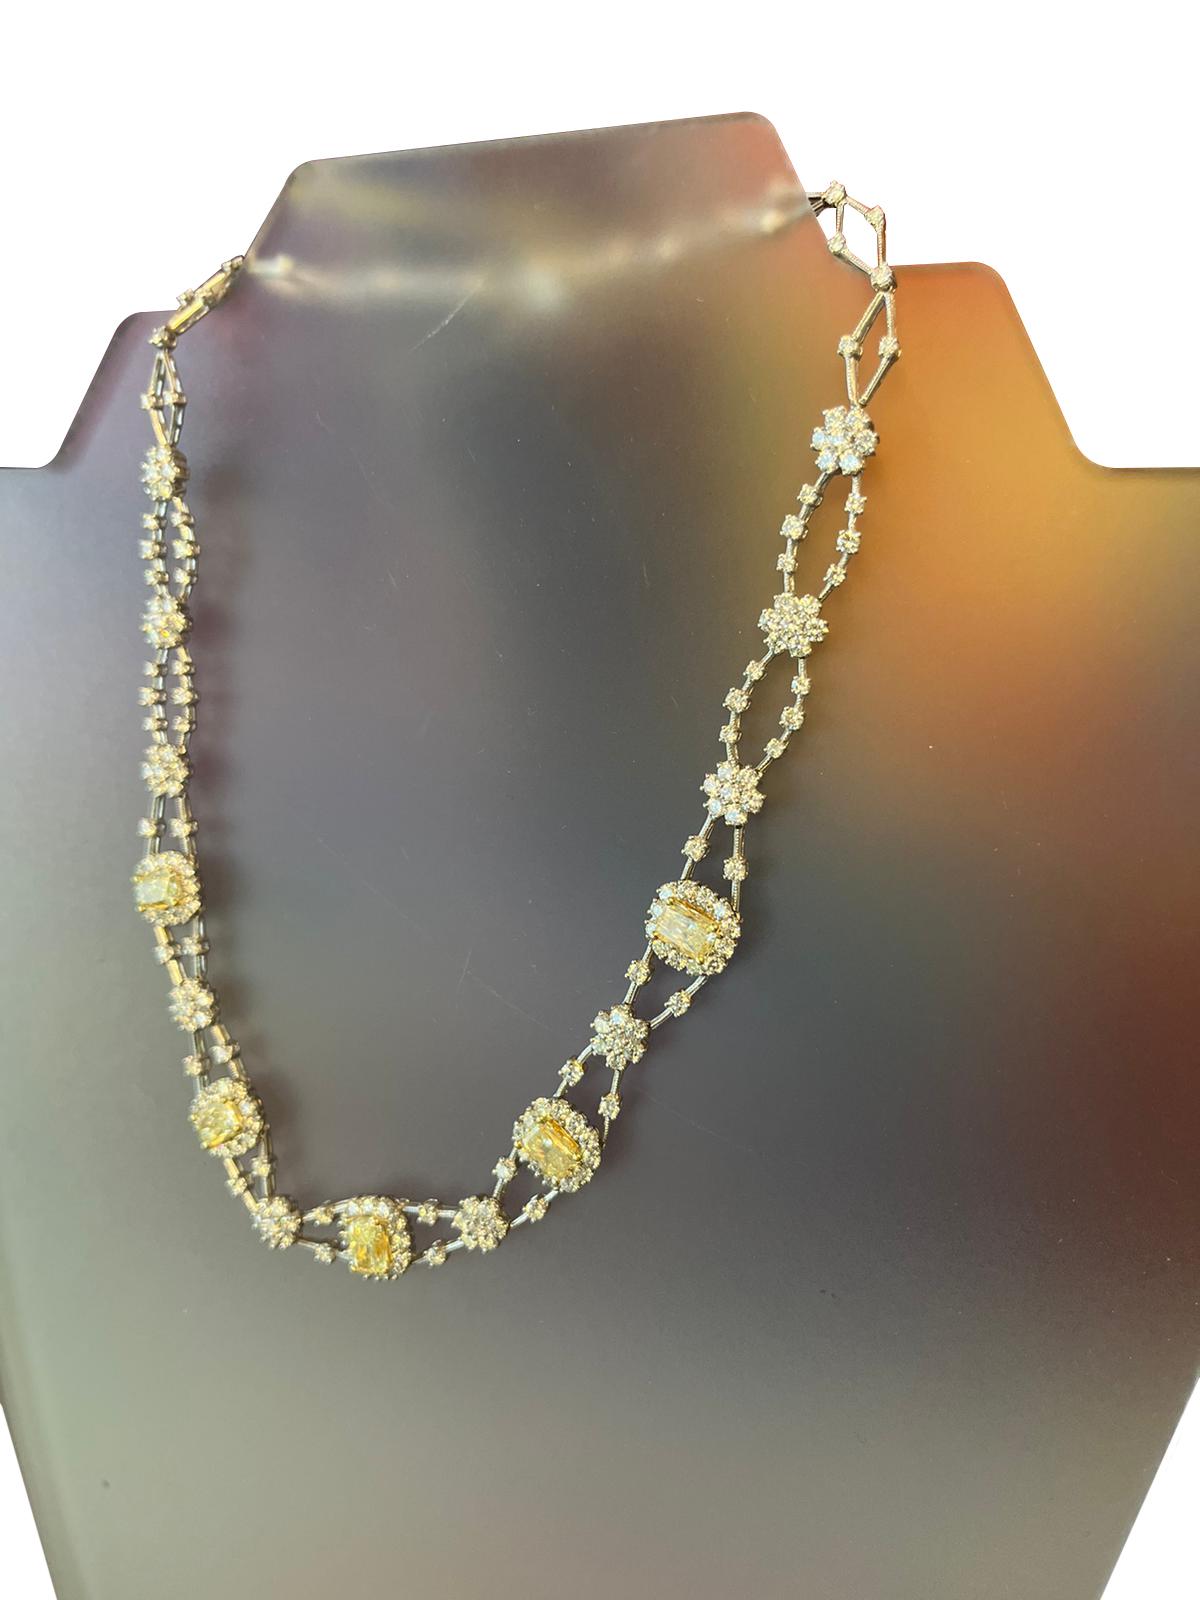 11.8ctw Natural Radiant Cut Yellow Fancy Color 5.80ct White Diamonds Necklace For Sale 3